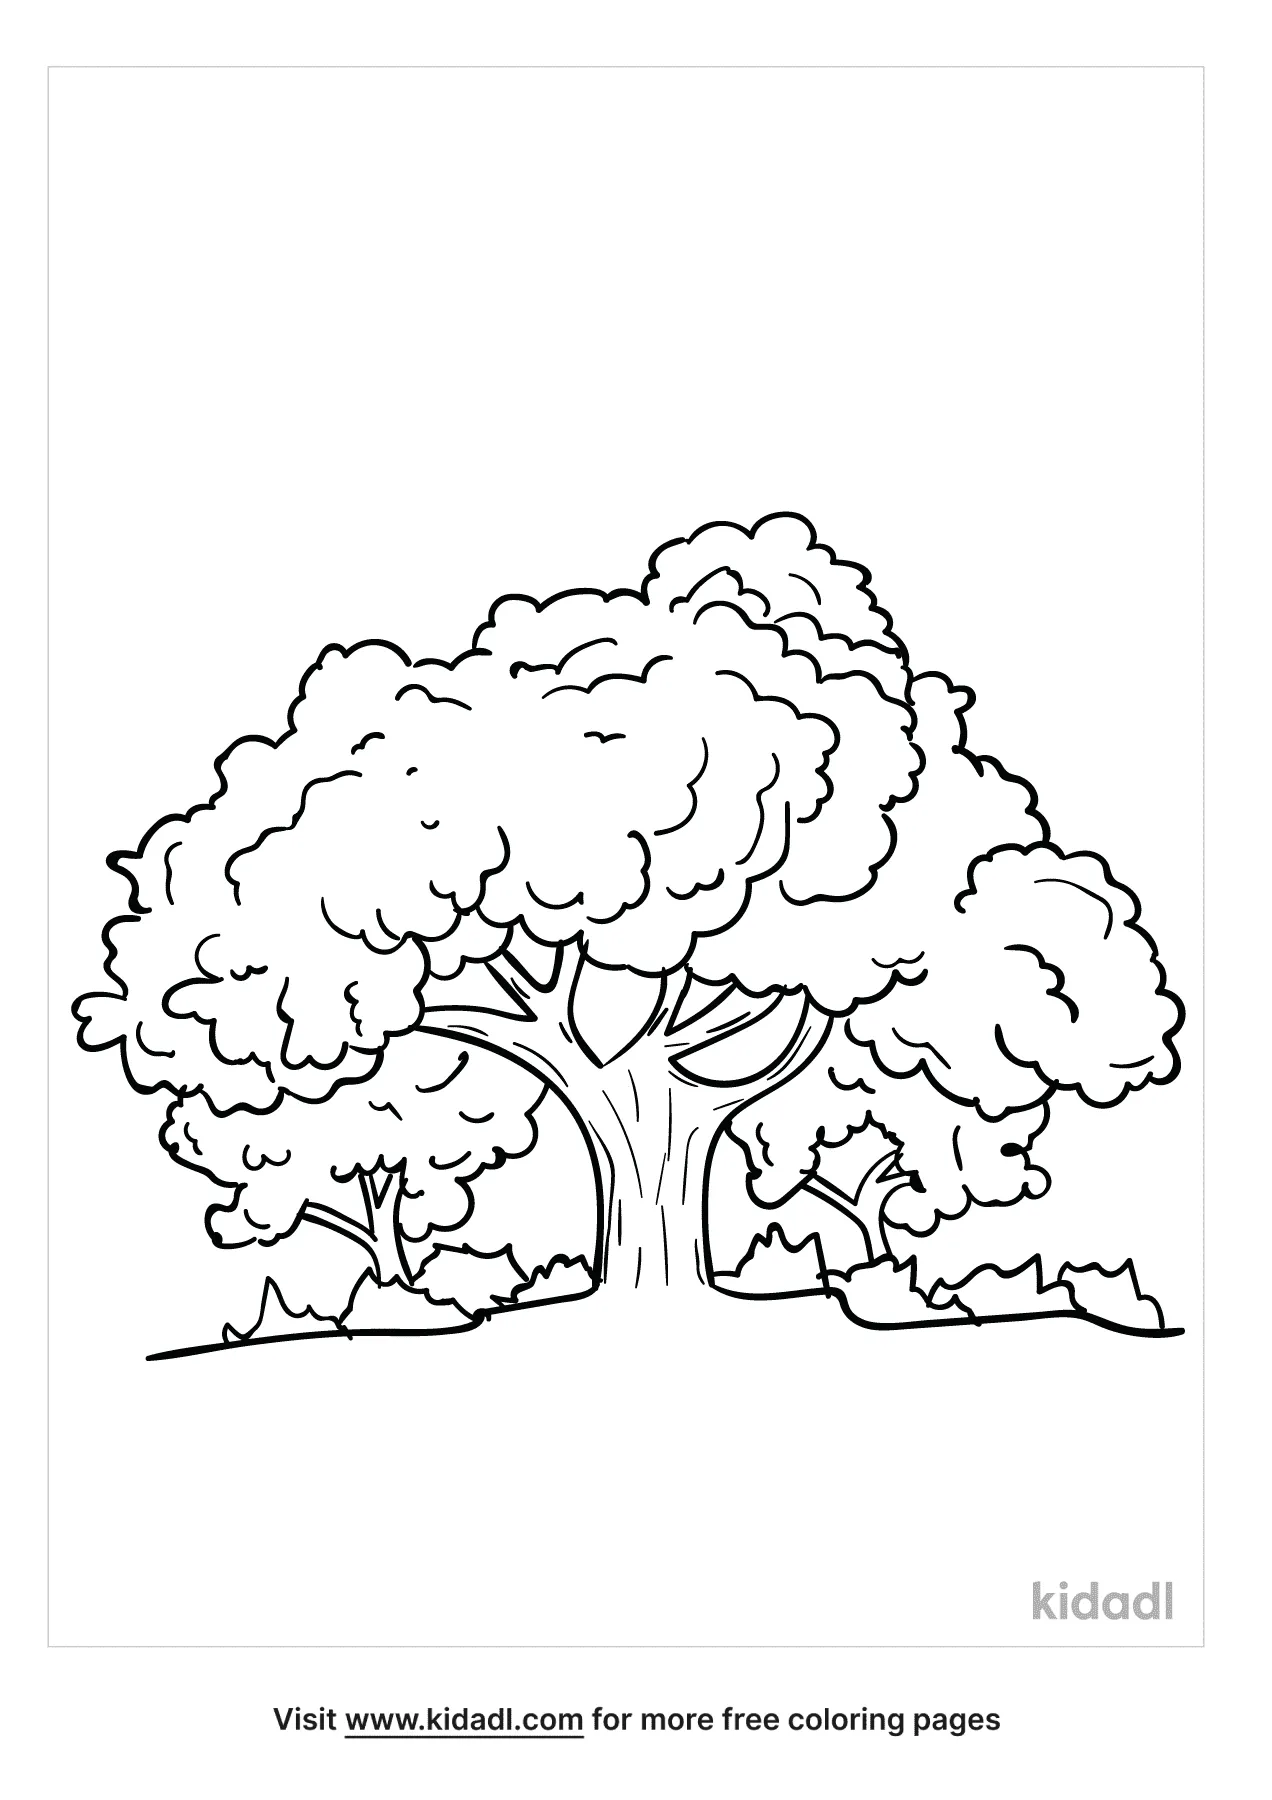 Realistic Coloring Pages | Coloring Pages | Kidadl